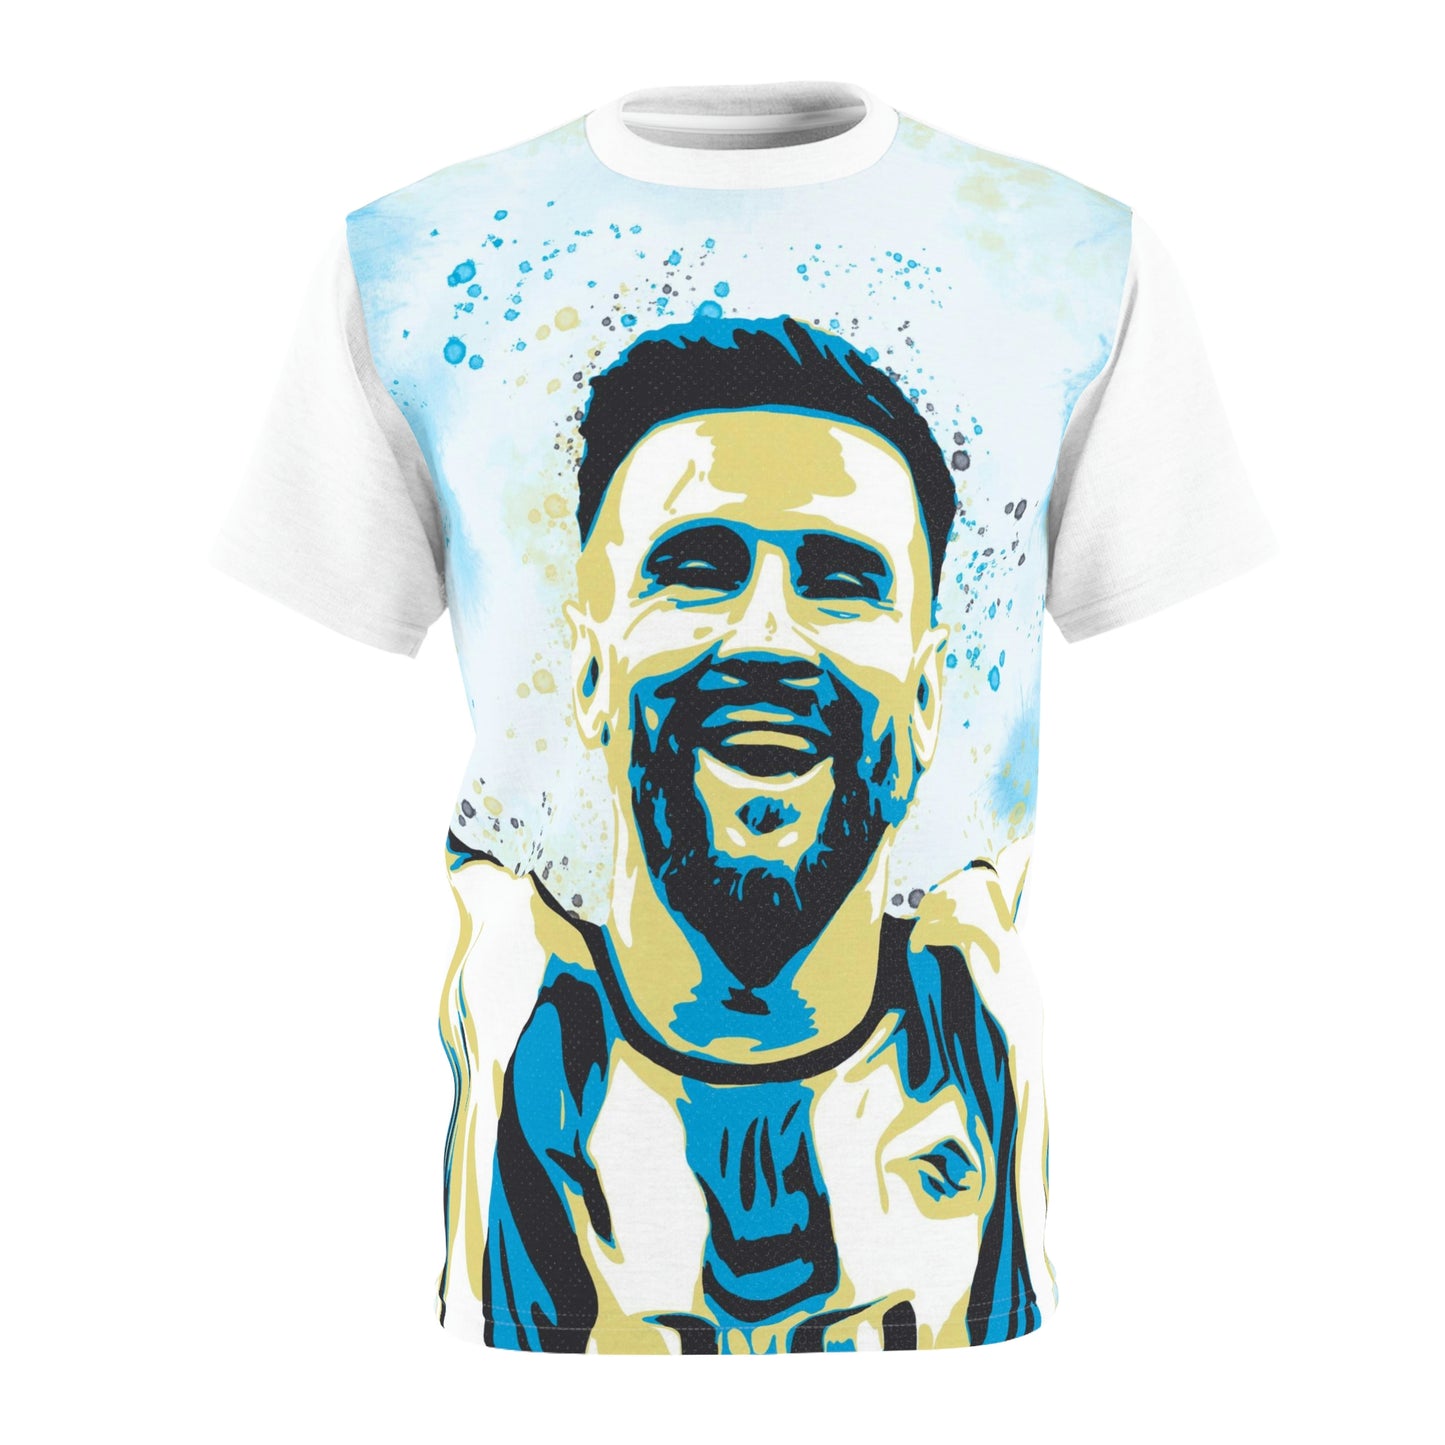 Lionel Messi World Cup 2022 T-shirt, Argentina Messi shirt, Football tee, all over print